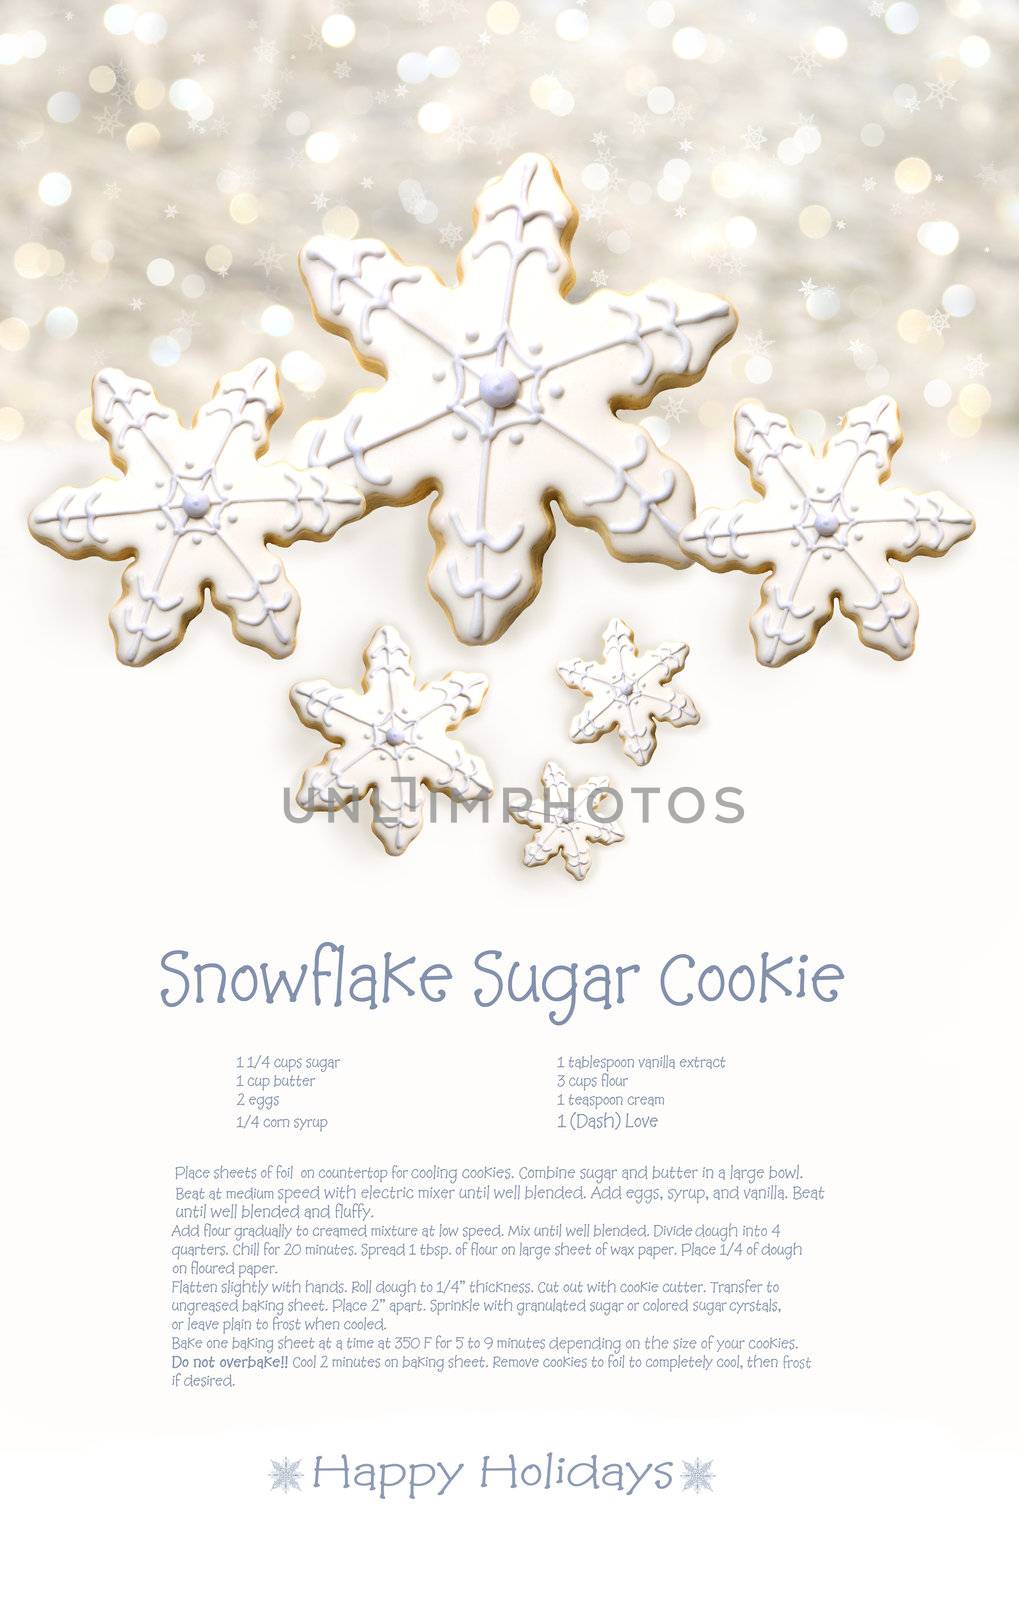 Snowflake sugar cookies with recipe on holiday background